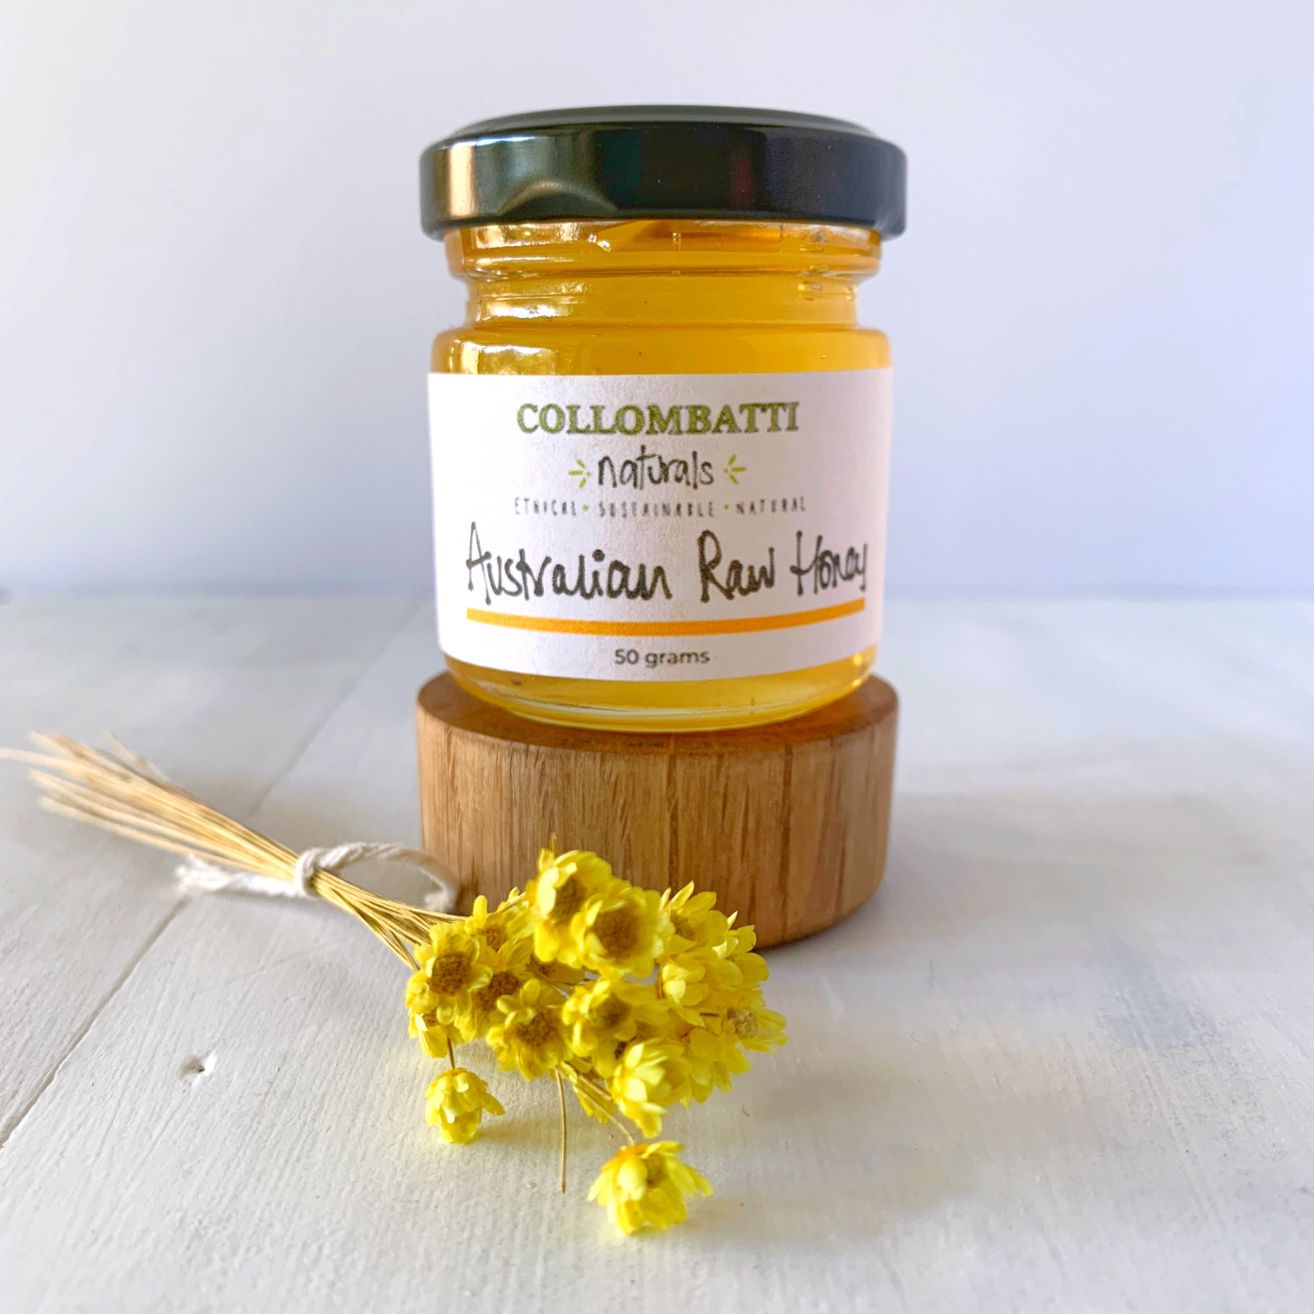 Collombatti Naturals sample size honey sitting on a block of wood with yellow flowers